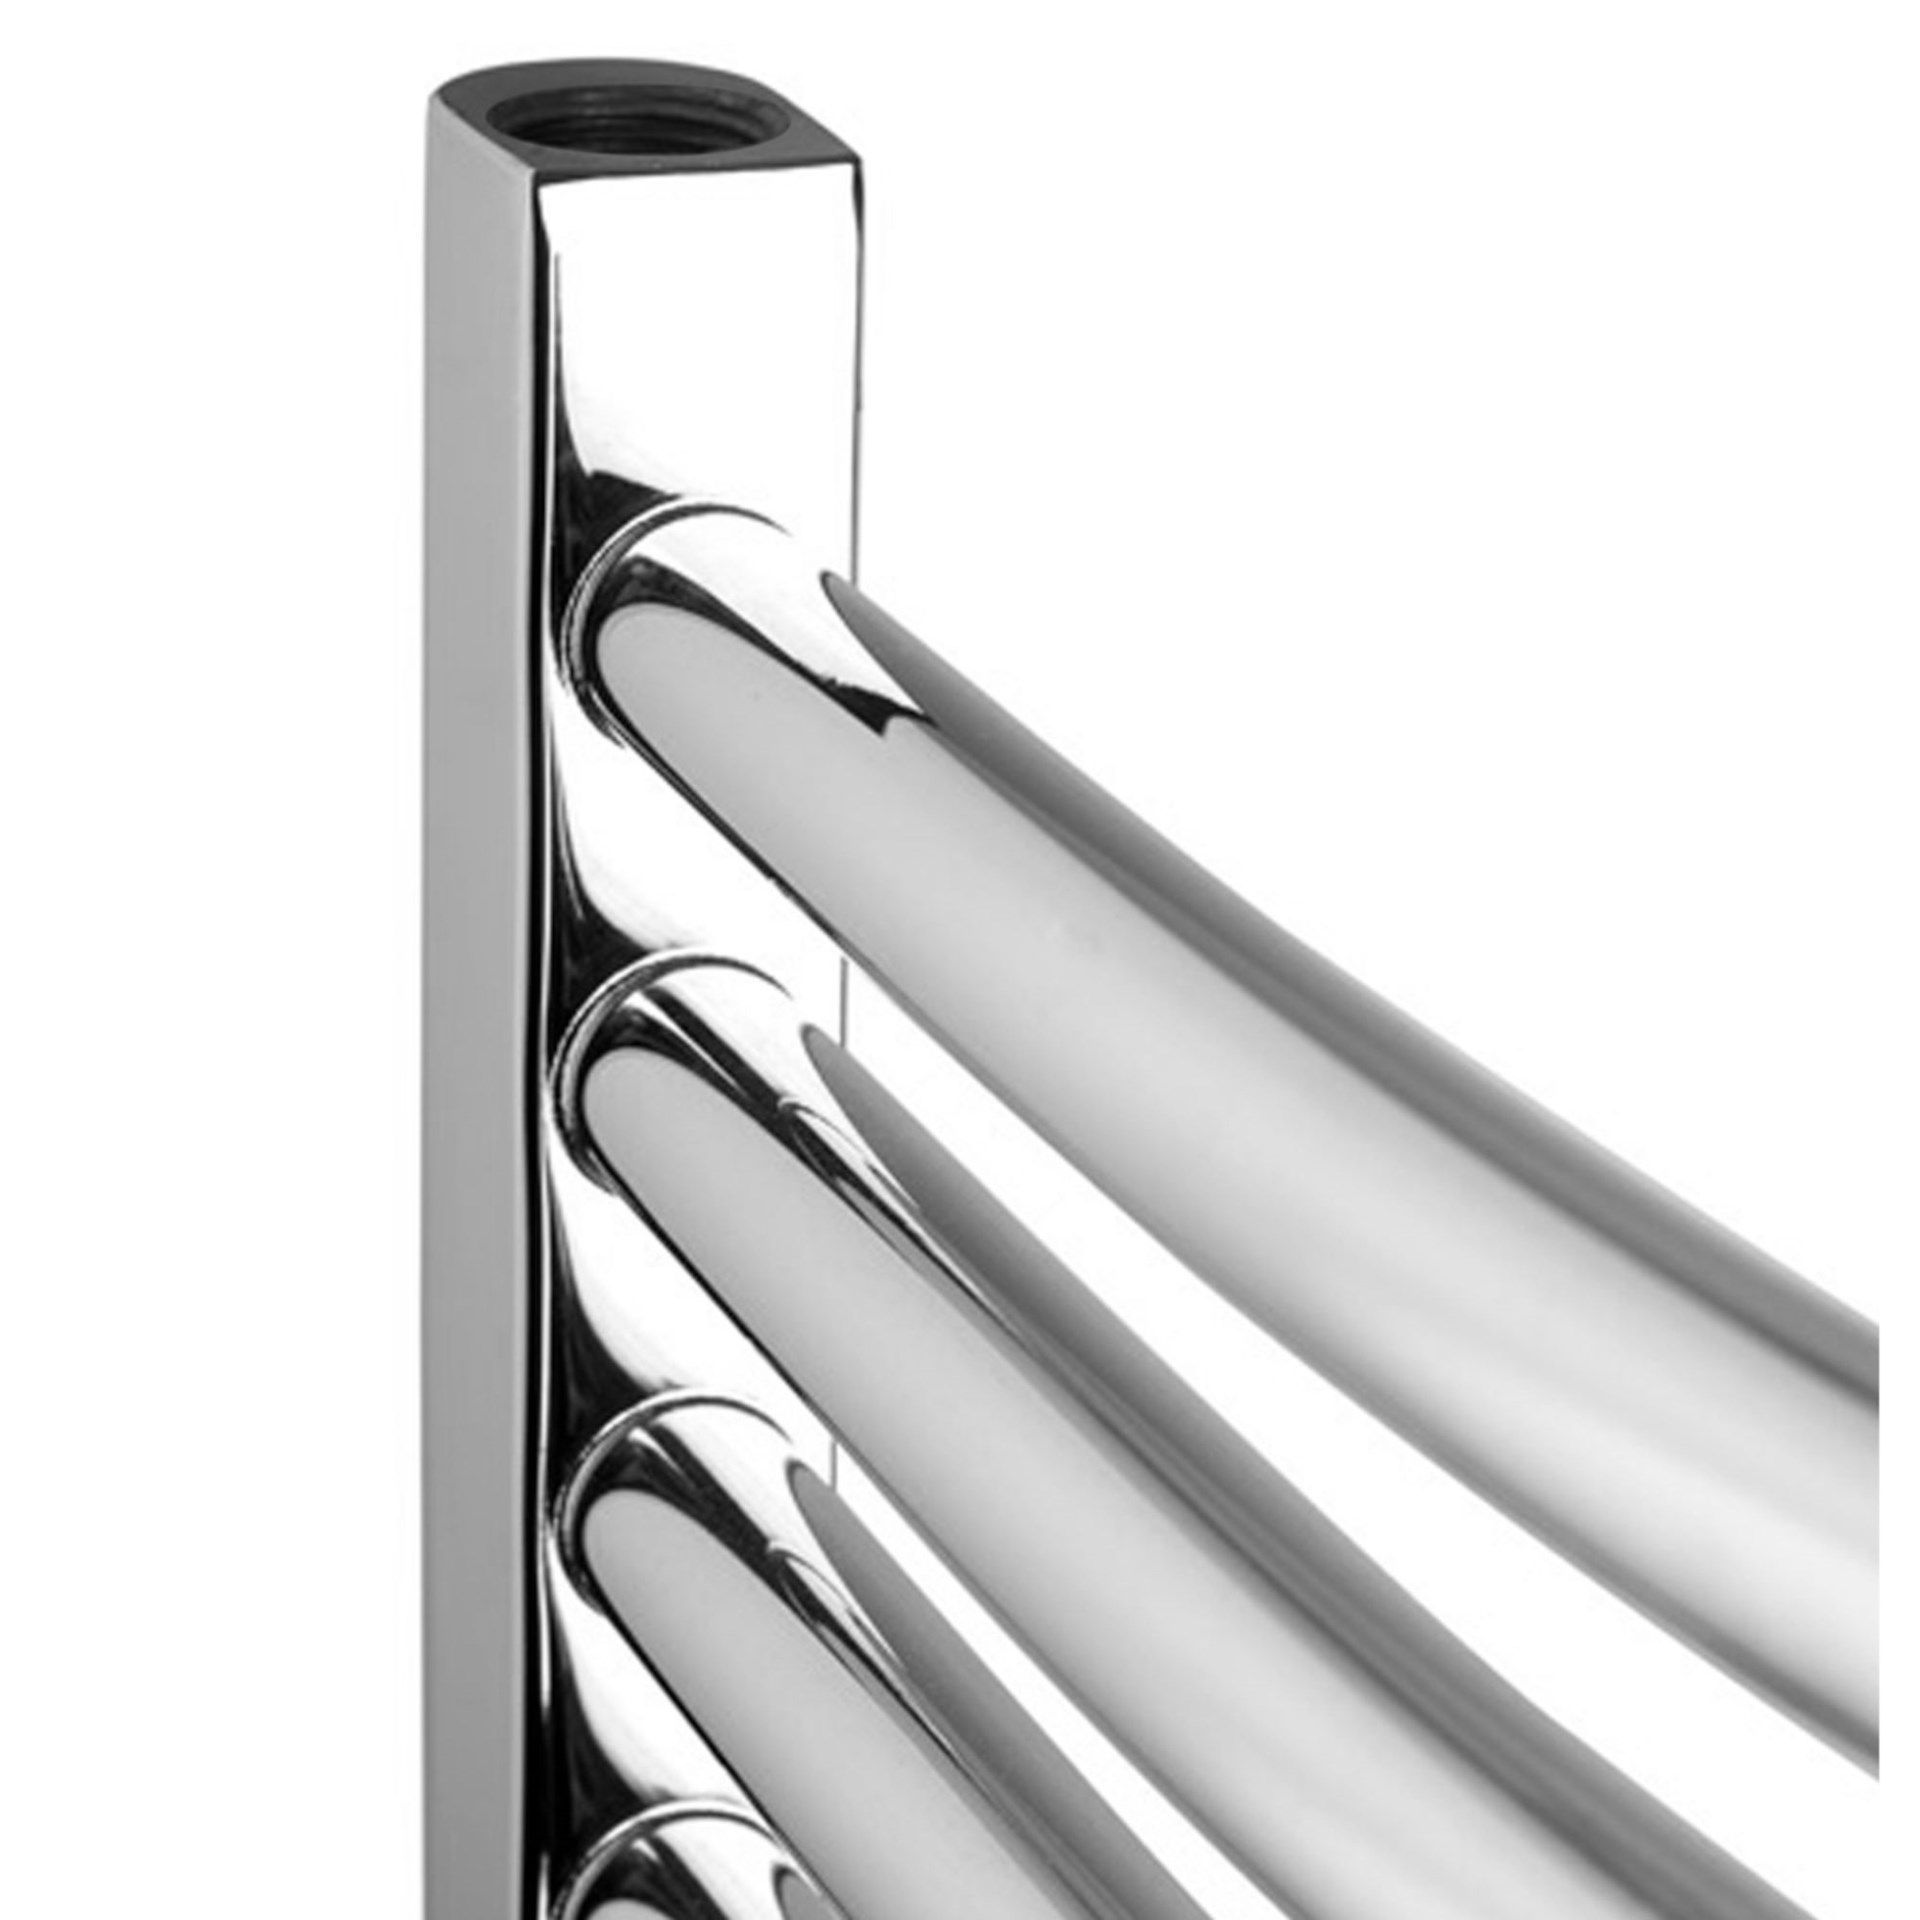 New & Boxed 1200x600mm - 20mm Tubes - Chrome Curved Rail Ladder Towel Radiator.Nc1200600.Made F... - Image 2 of 2